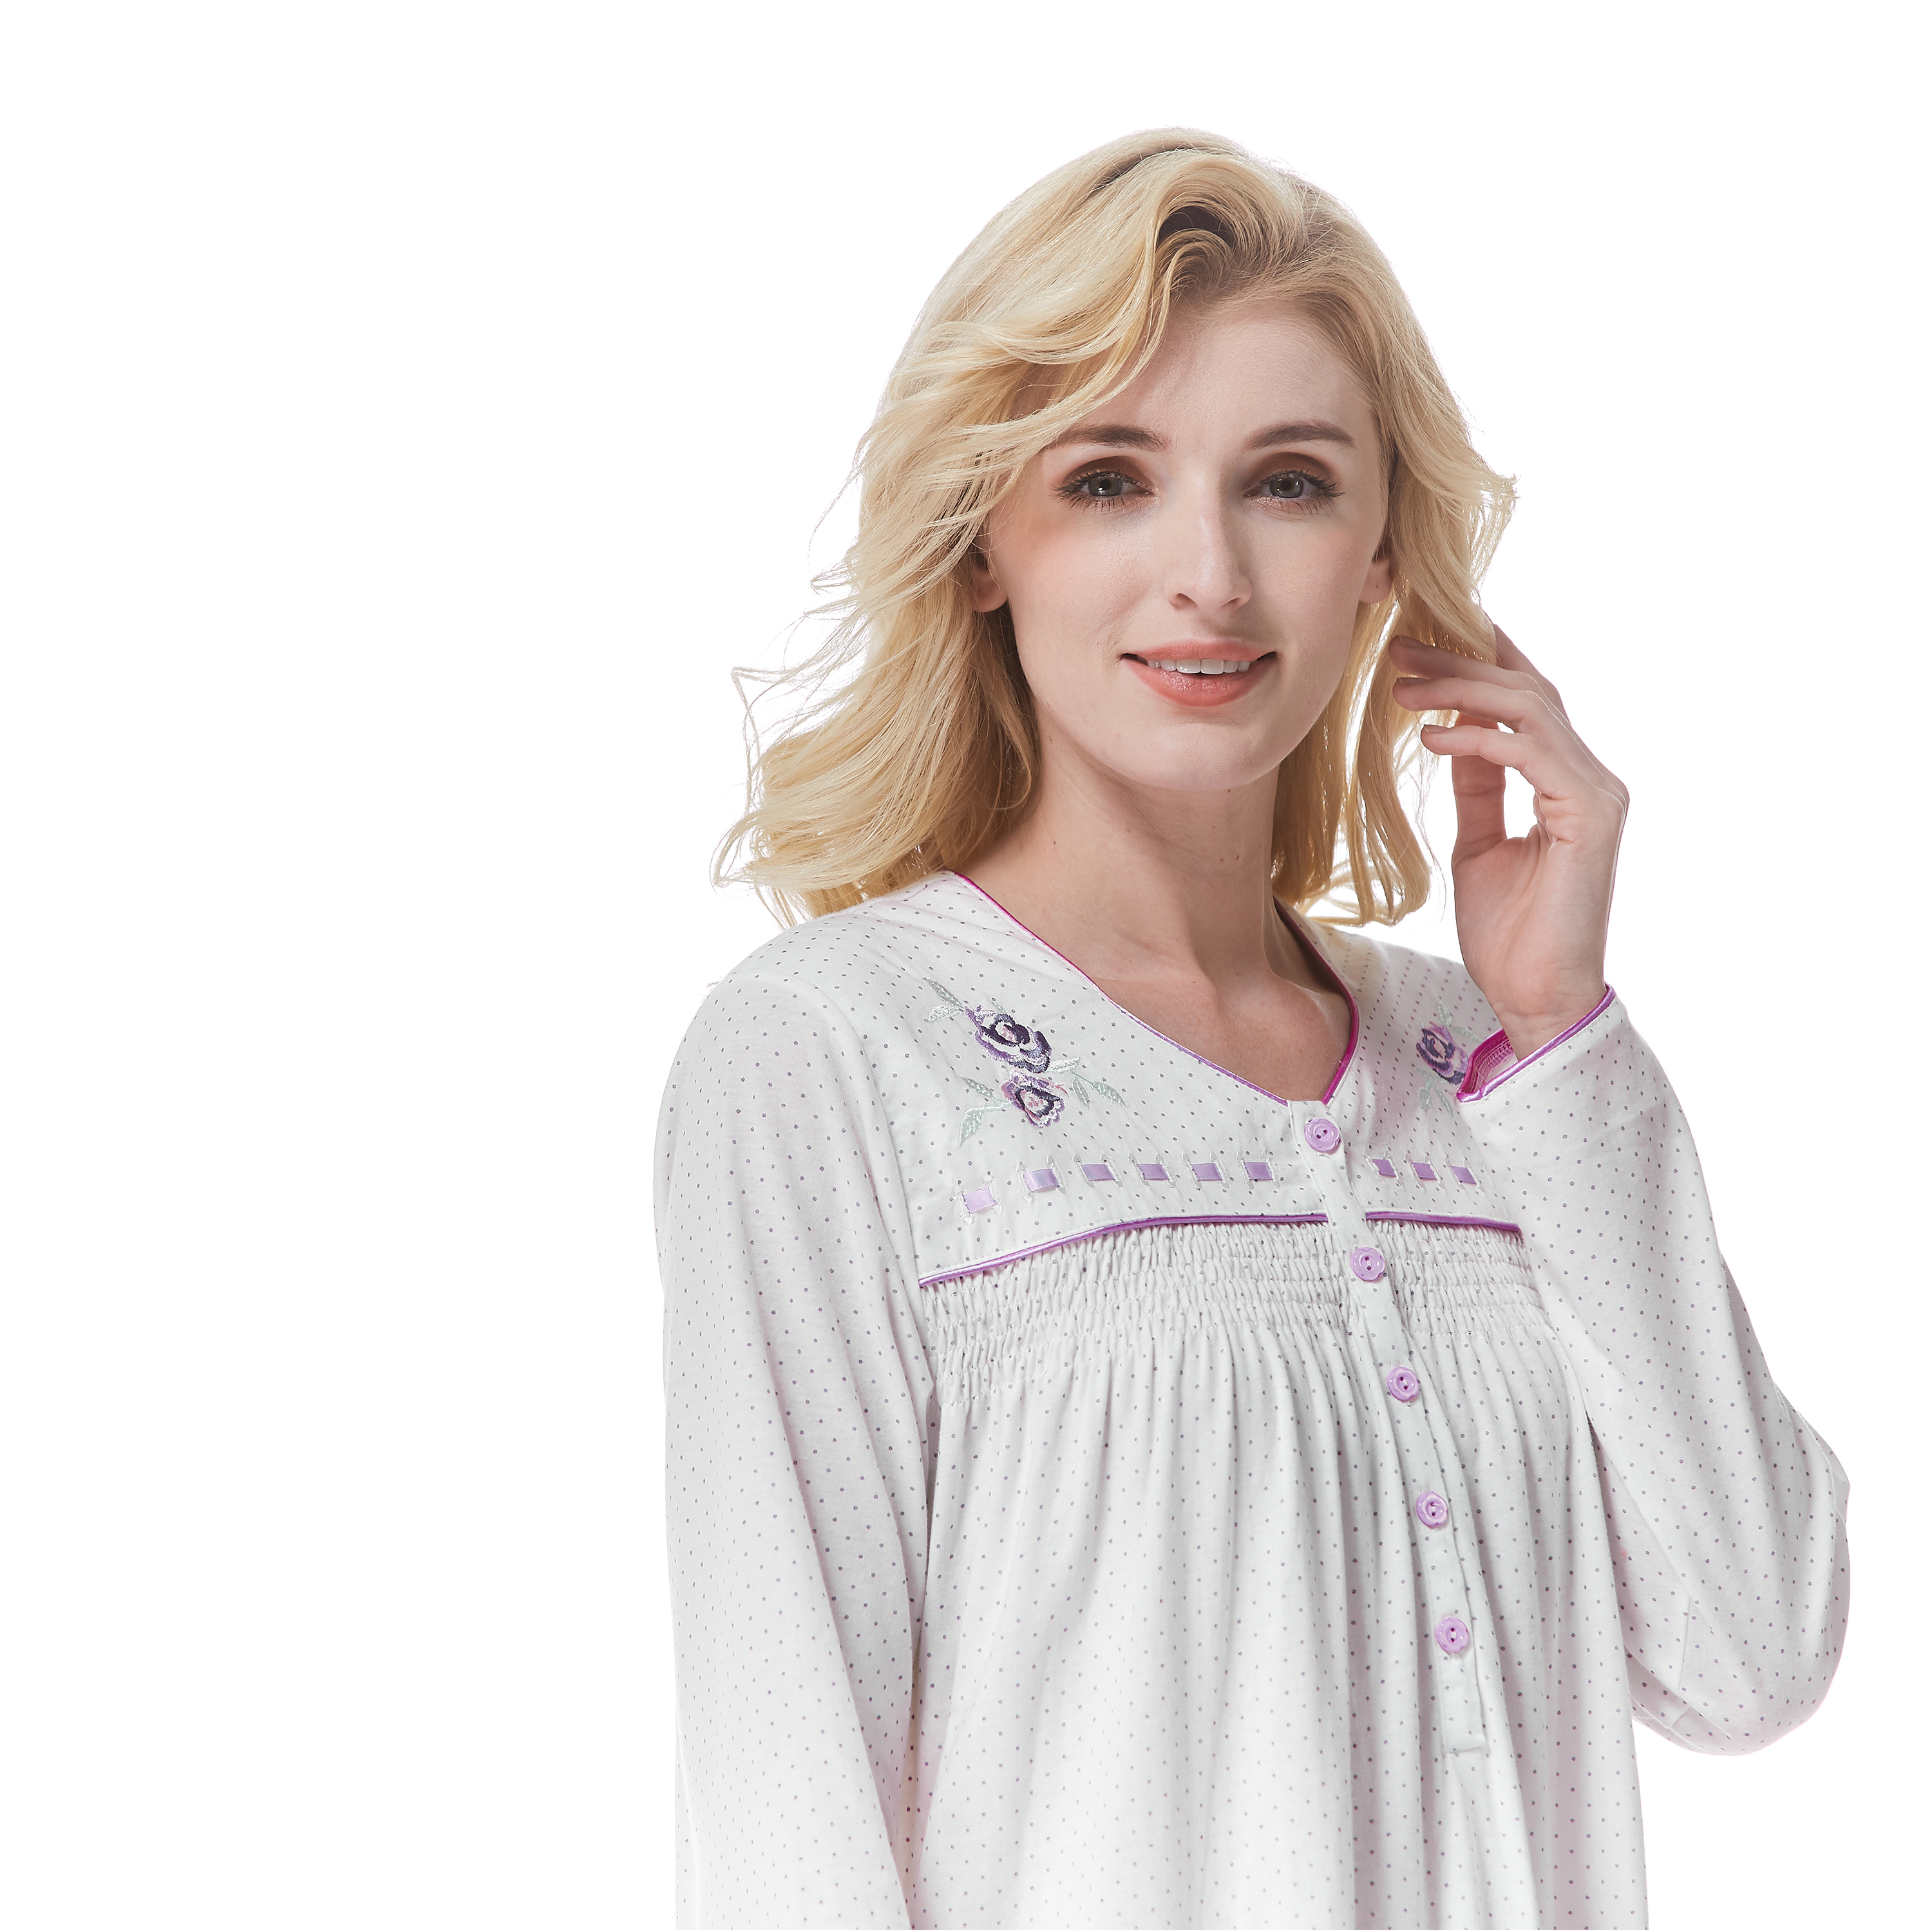 Keyocean Nightgowns for Women, 100% Cotton Embroidered Printing Long Sleeves  Sleepwear, Purple Dots on Cream, K18012 - Keyocean Cotton Nightgowns for  Women